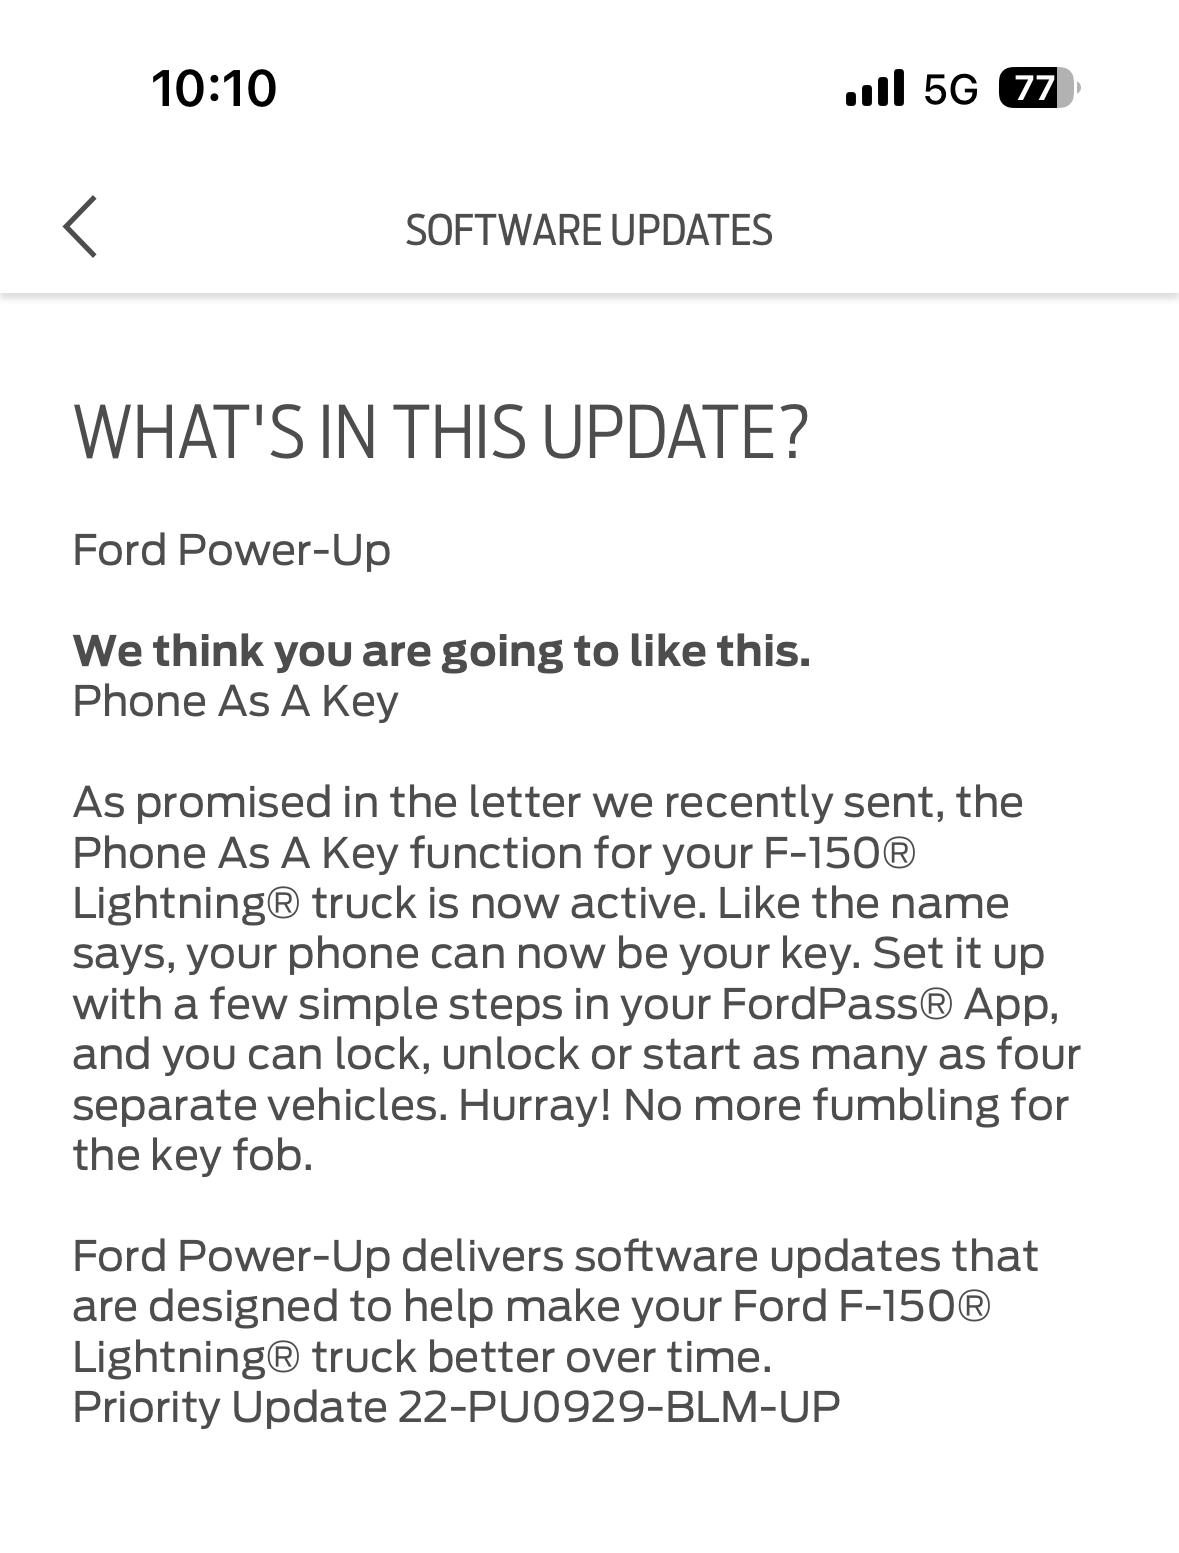 Ford F-150 Lightning Priority Update: 22-PU0929-BLM-UP IMG_9420